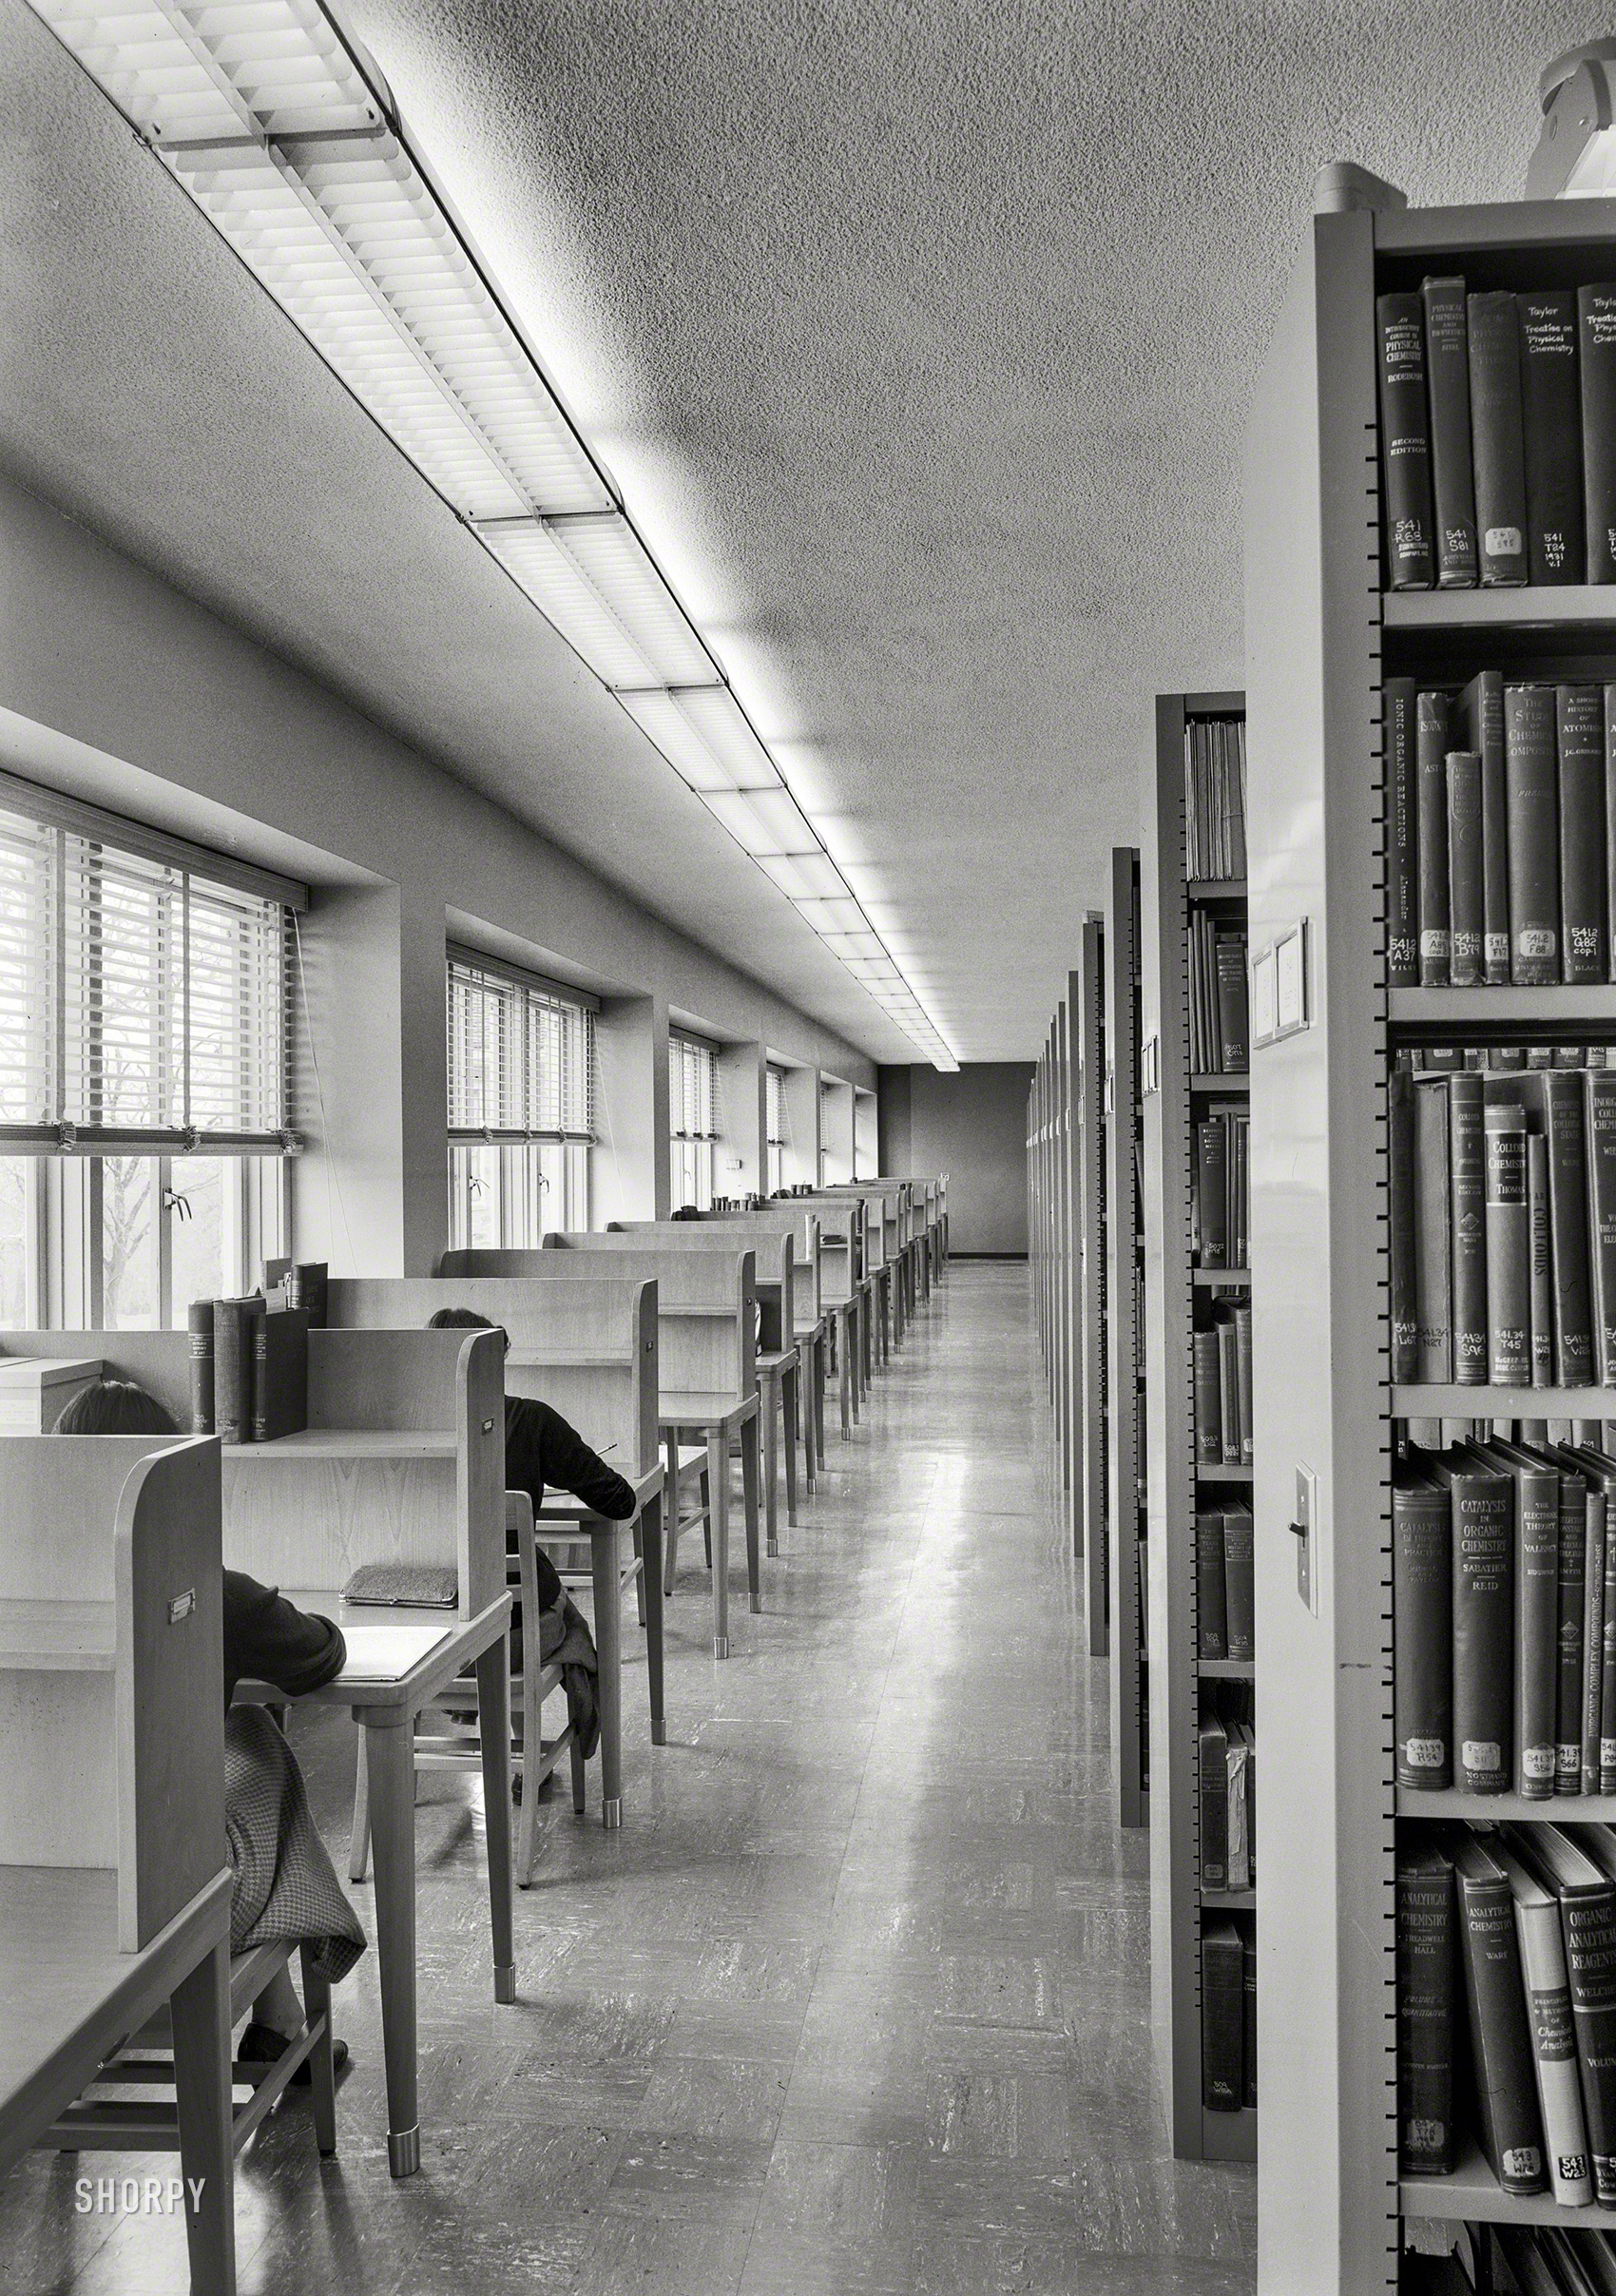 April 24, 1953. "Towson, Maryland. Goucher College, Library interior III. Moore & Hutchins, client." Acetate negative by Gottscho-Schleisner. View full size.